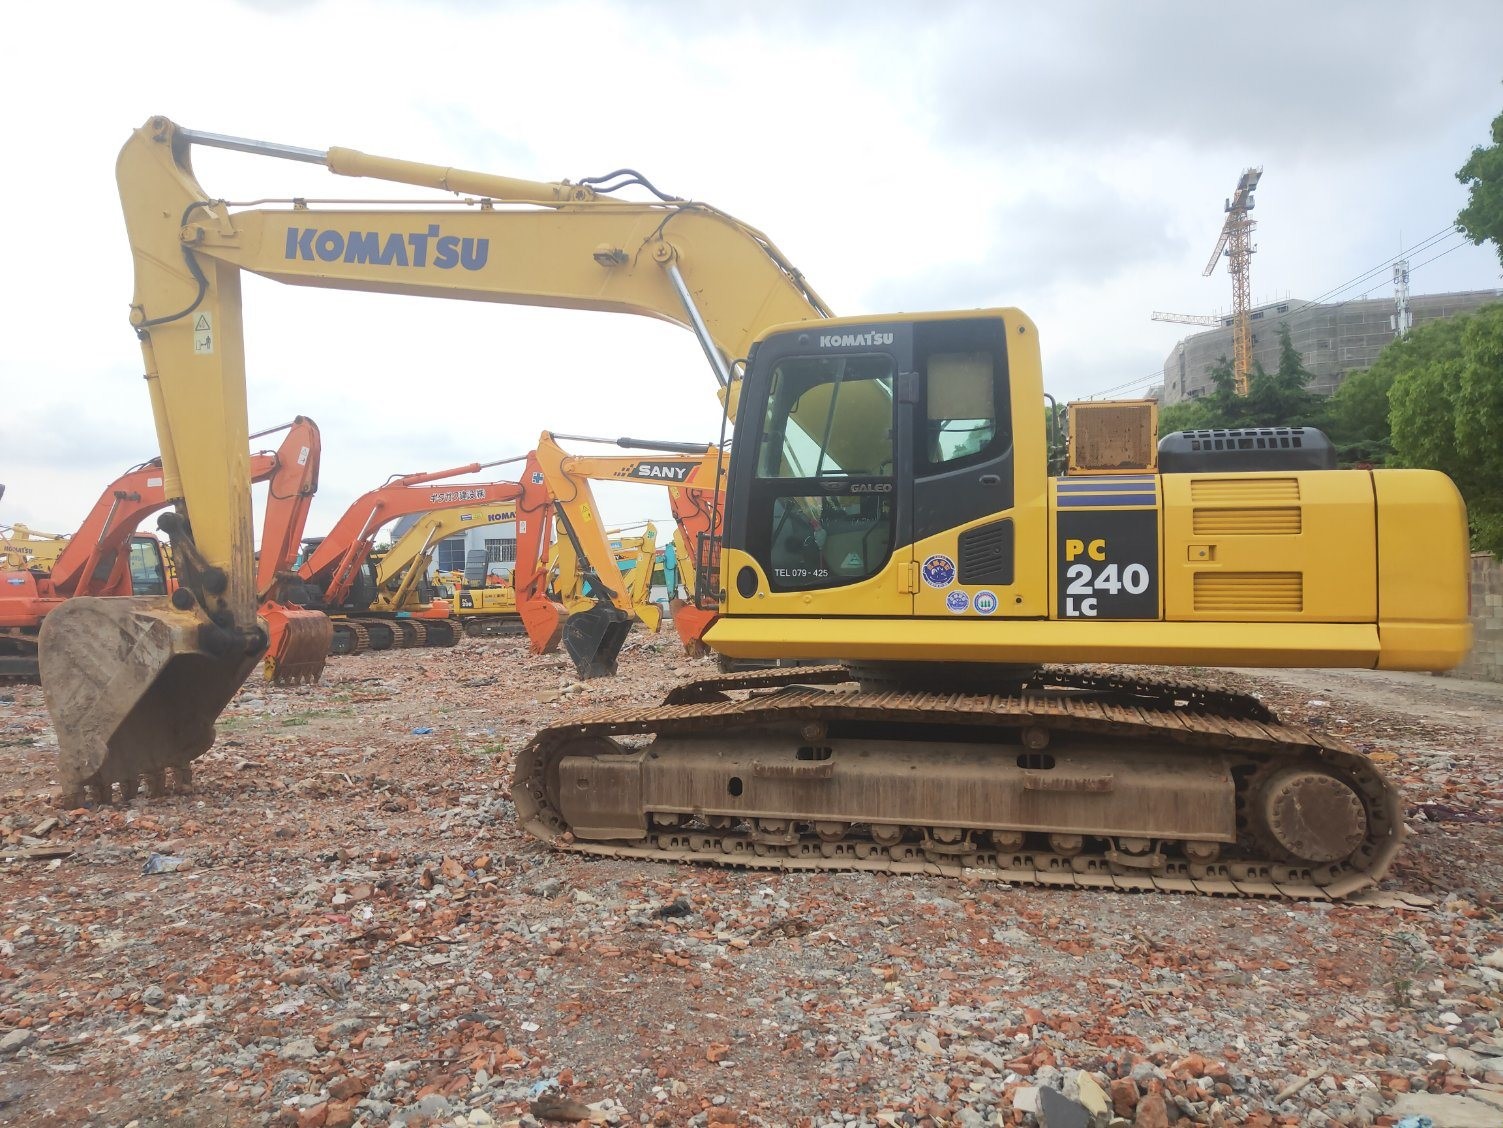 China                  Good and Cheap PC240-8 Komatsu Used Excavator for Sale Secondhand Excavator Komatsu PC200 PC210 PC220 PC230 PC240 PC270 Track Digger High Quality Hot Sale              for sale